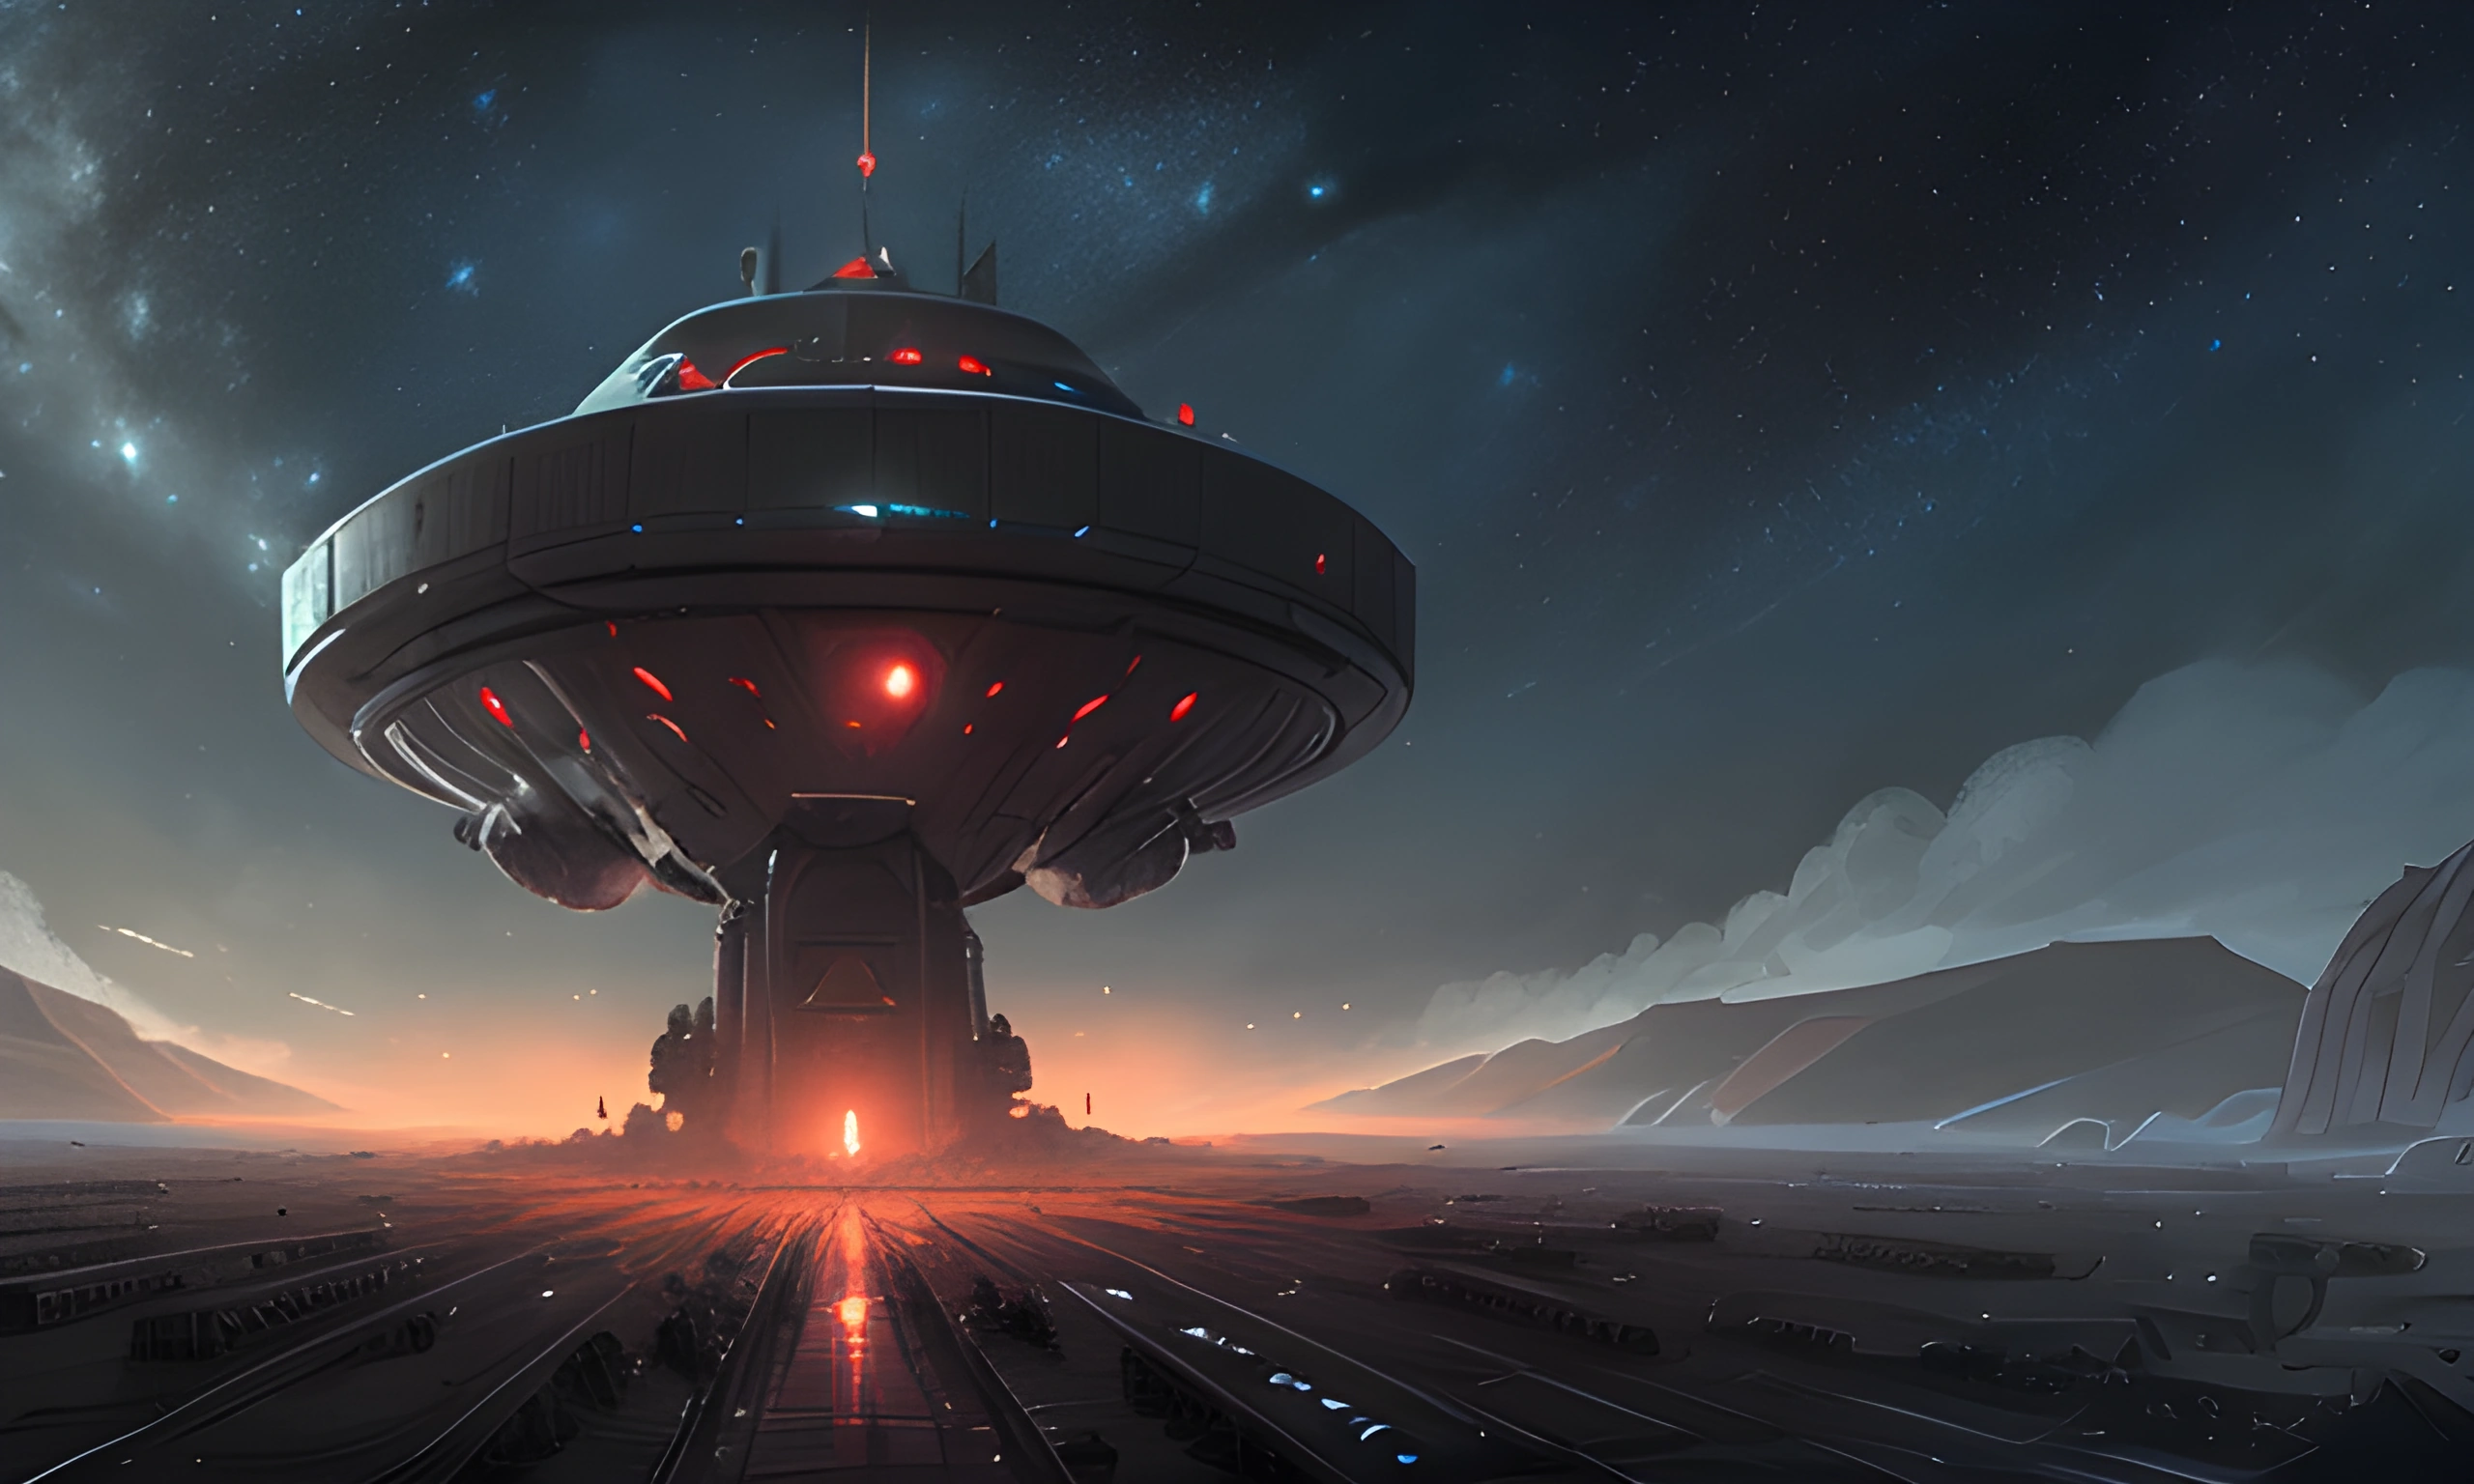 spaceship flying over a train track in a futuristic setting